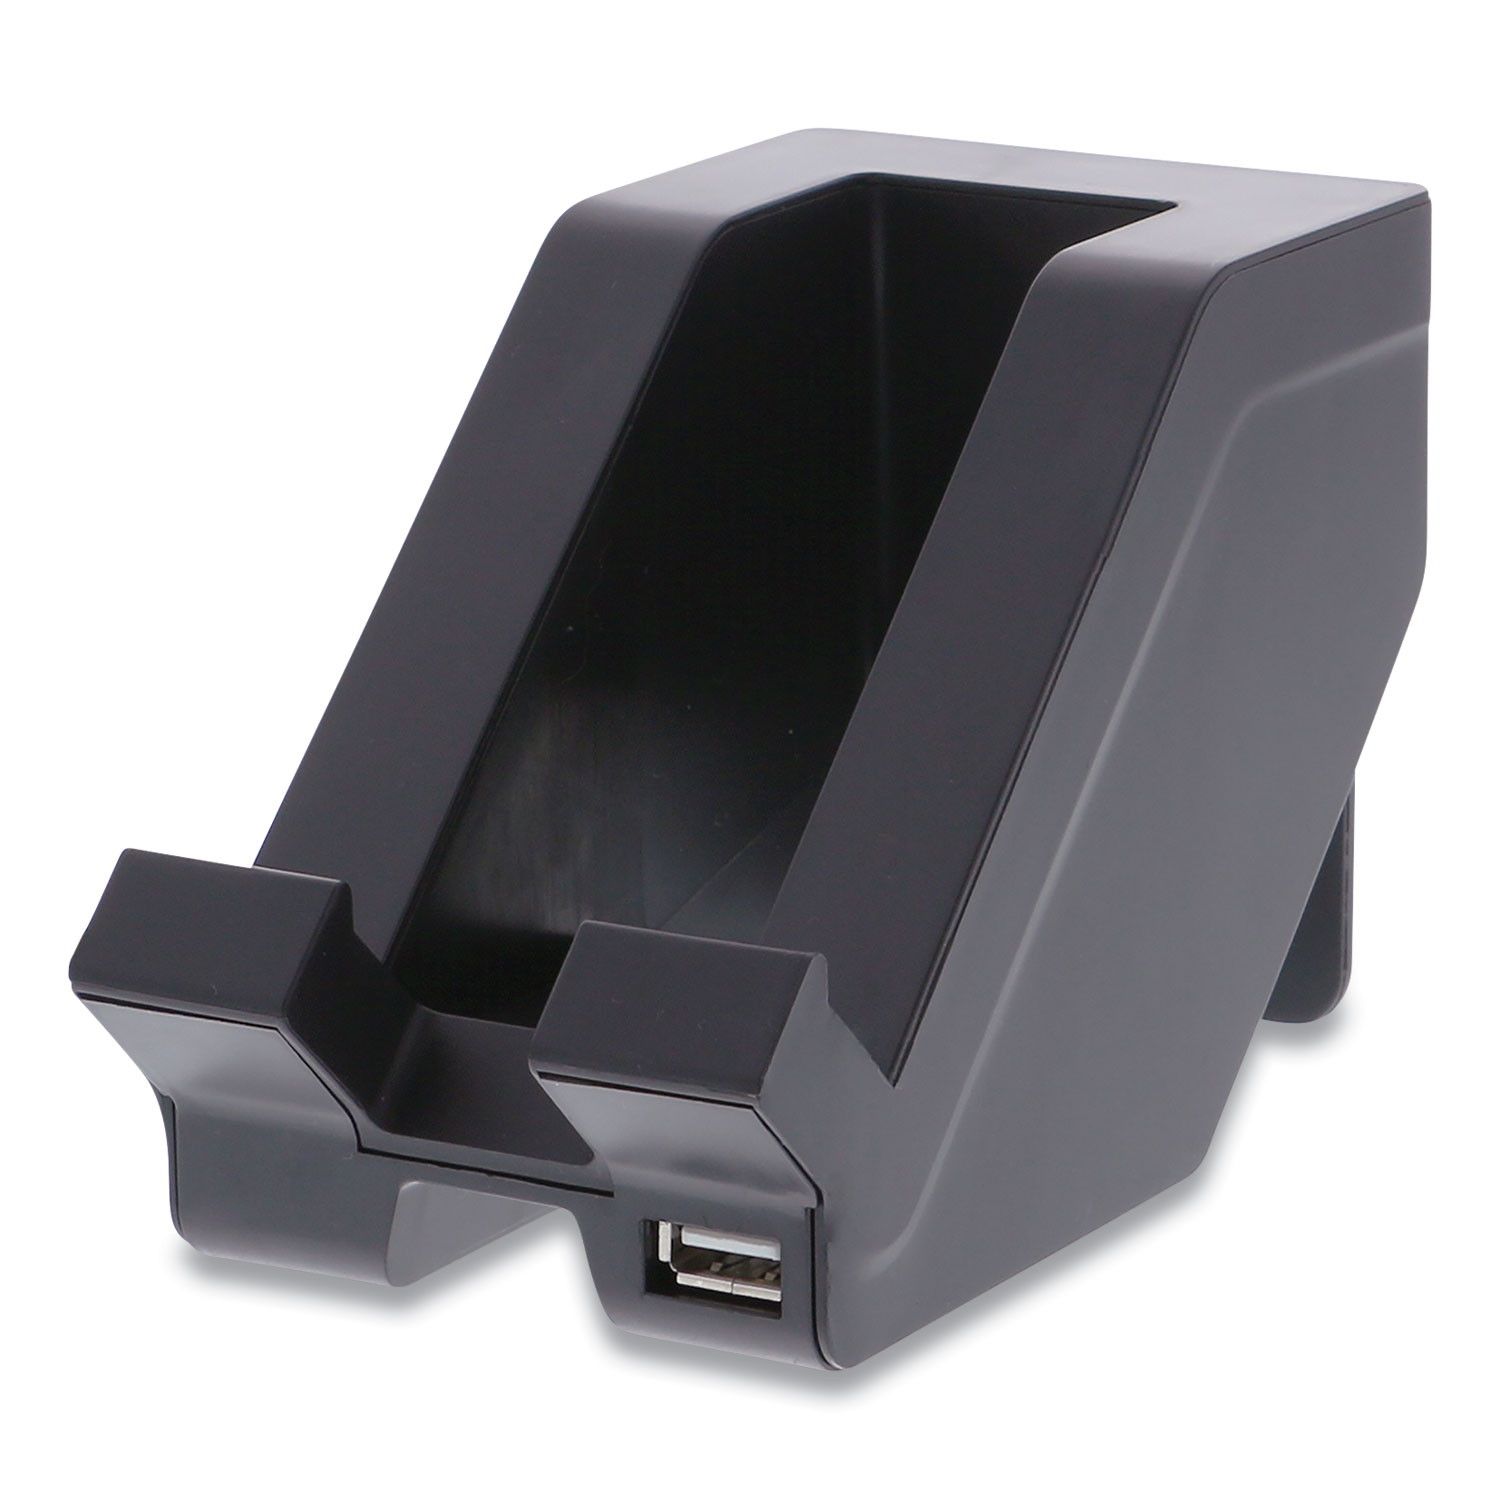  Bostitch KT-PHONE-BLK Konnect Plastic Phone Dock with USB Port, For Use with Phones and Tablets, 3 x 3.5 x 5, Black (BOS24340006) 